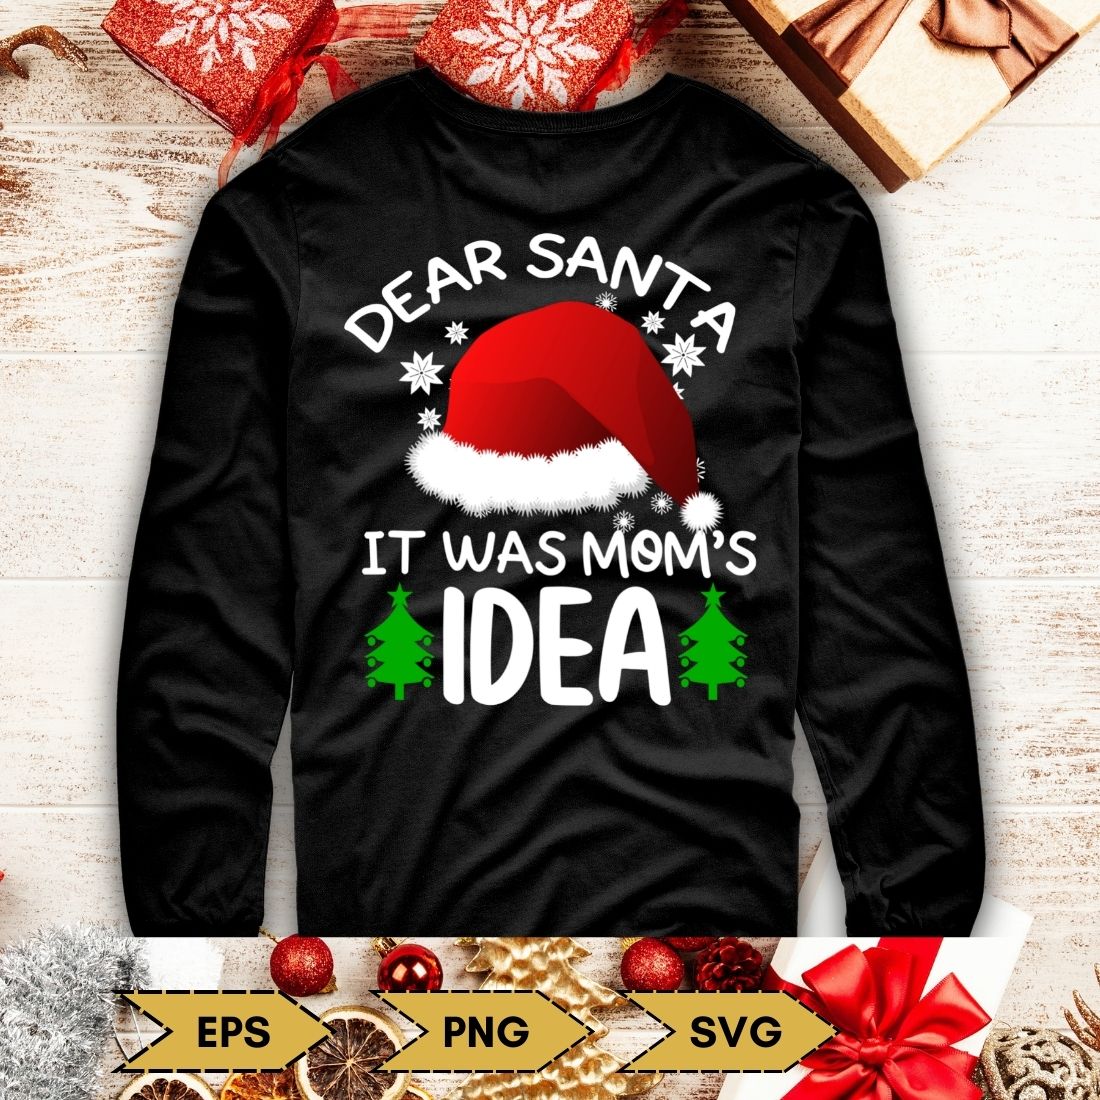 Image of a black sweatshirt with a gorgeous print on the Christmas theme.